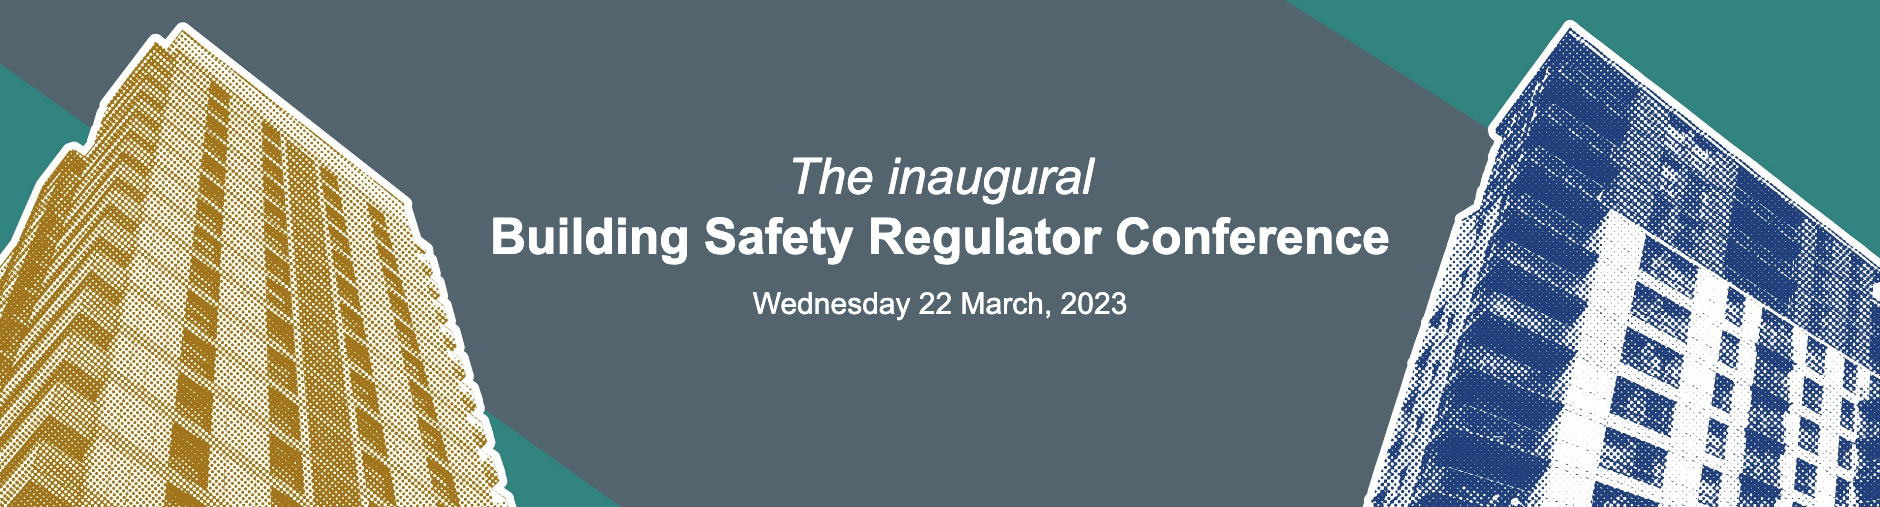 Inaugural Building Safety Regulator Conference